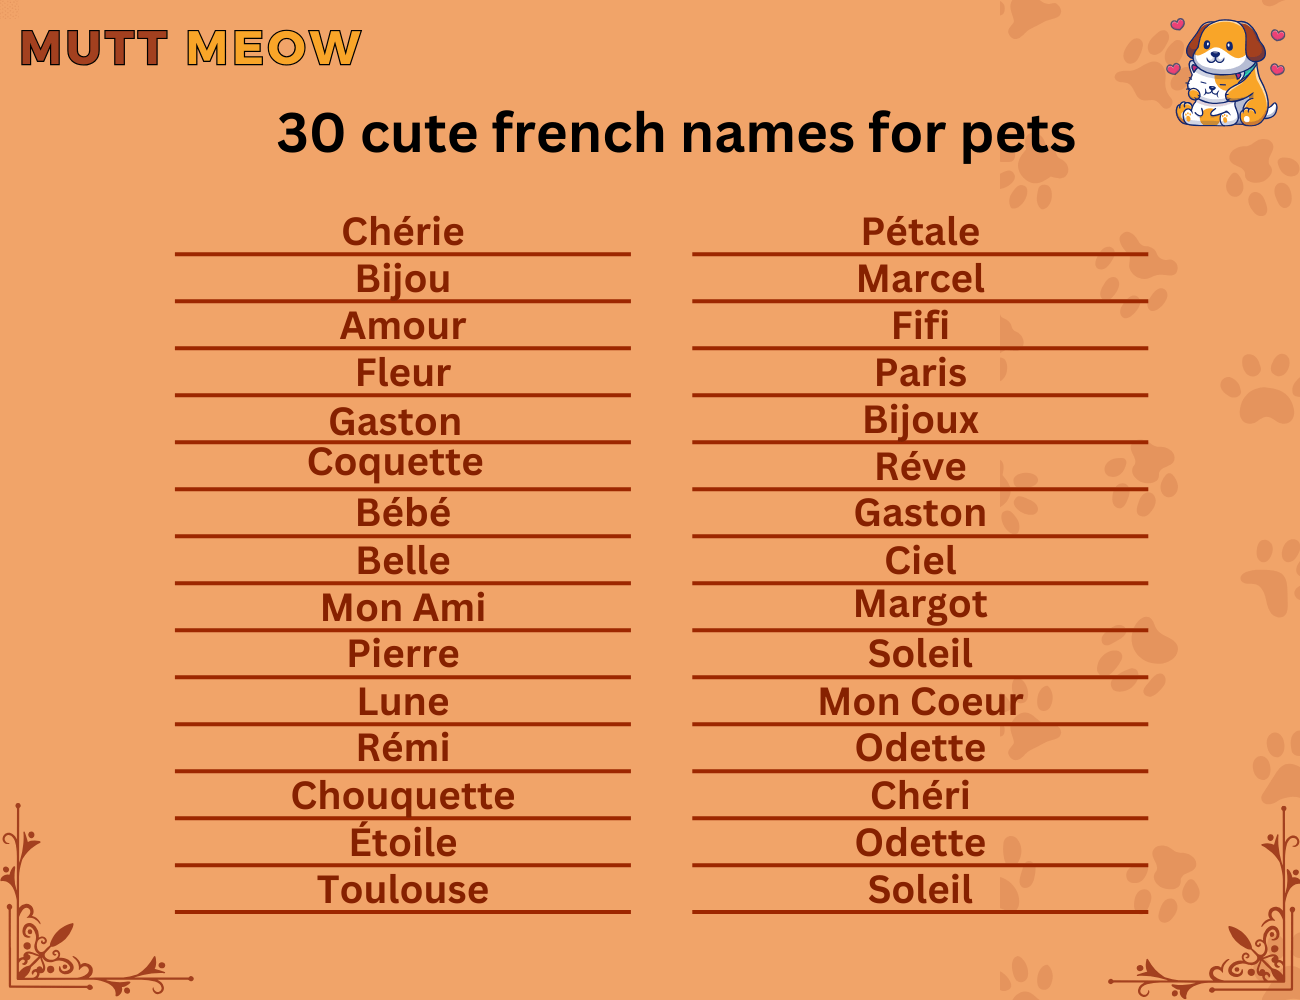 30 cute french names for pets